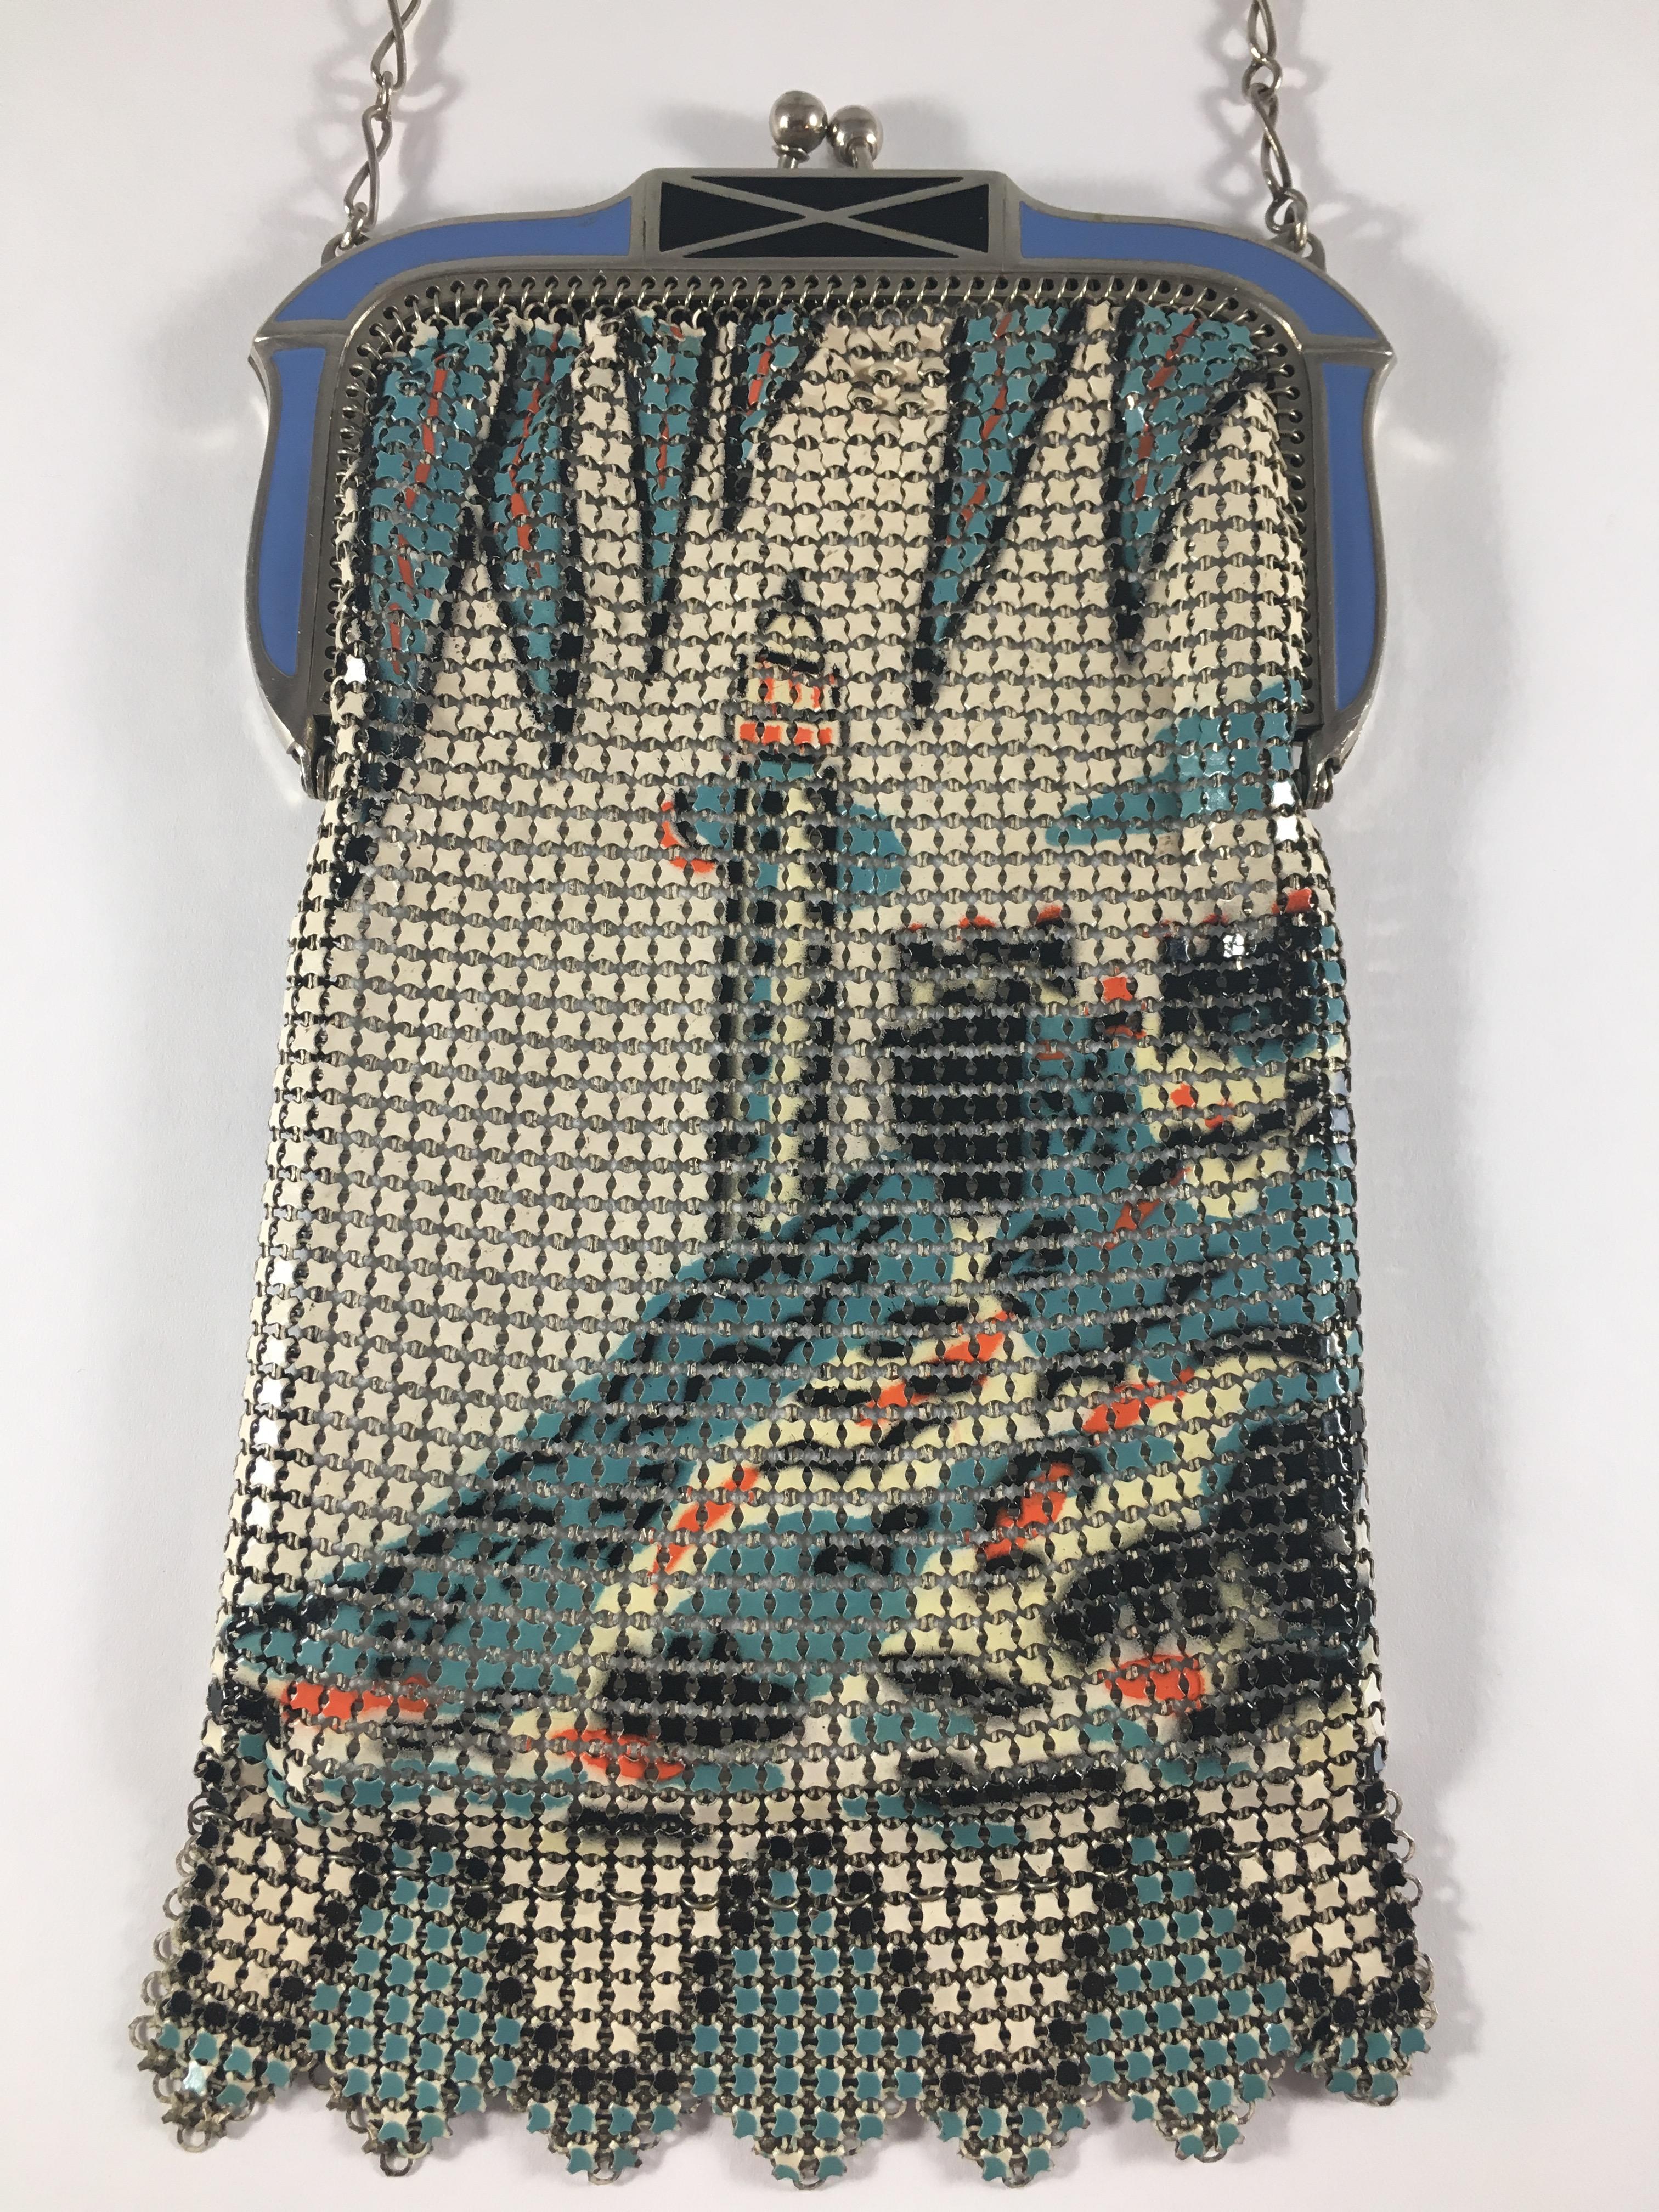 Glamorous and delicate 1920s Whiting and Davis mesh and enamel Lighthouse evening purse. This gorgeous enamel mesh purse features a lighthouse depicted in red, white and blue on both sides of the bag. It has an art deco enameled clasp in blue and